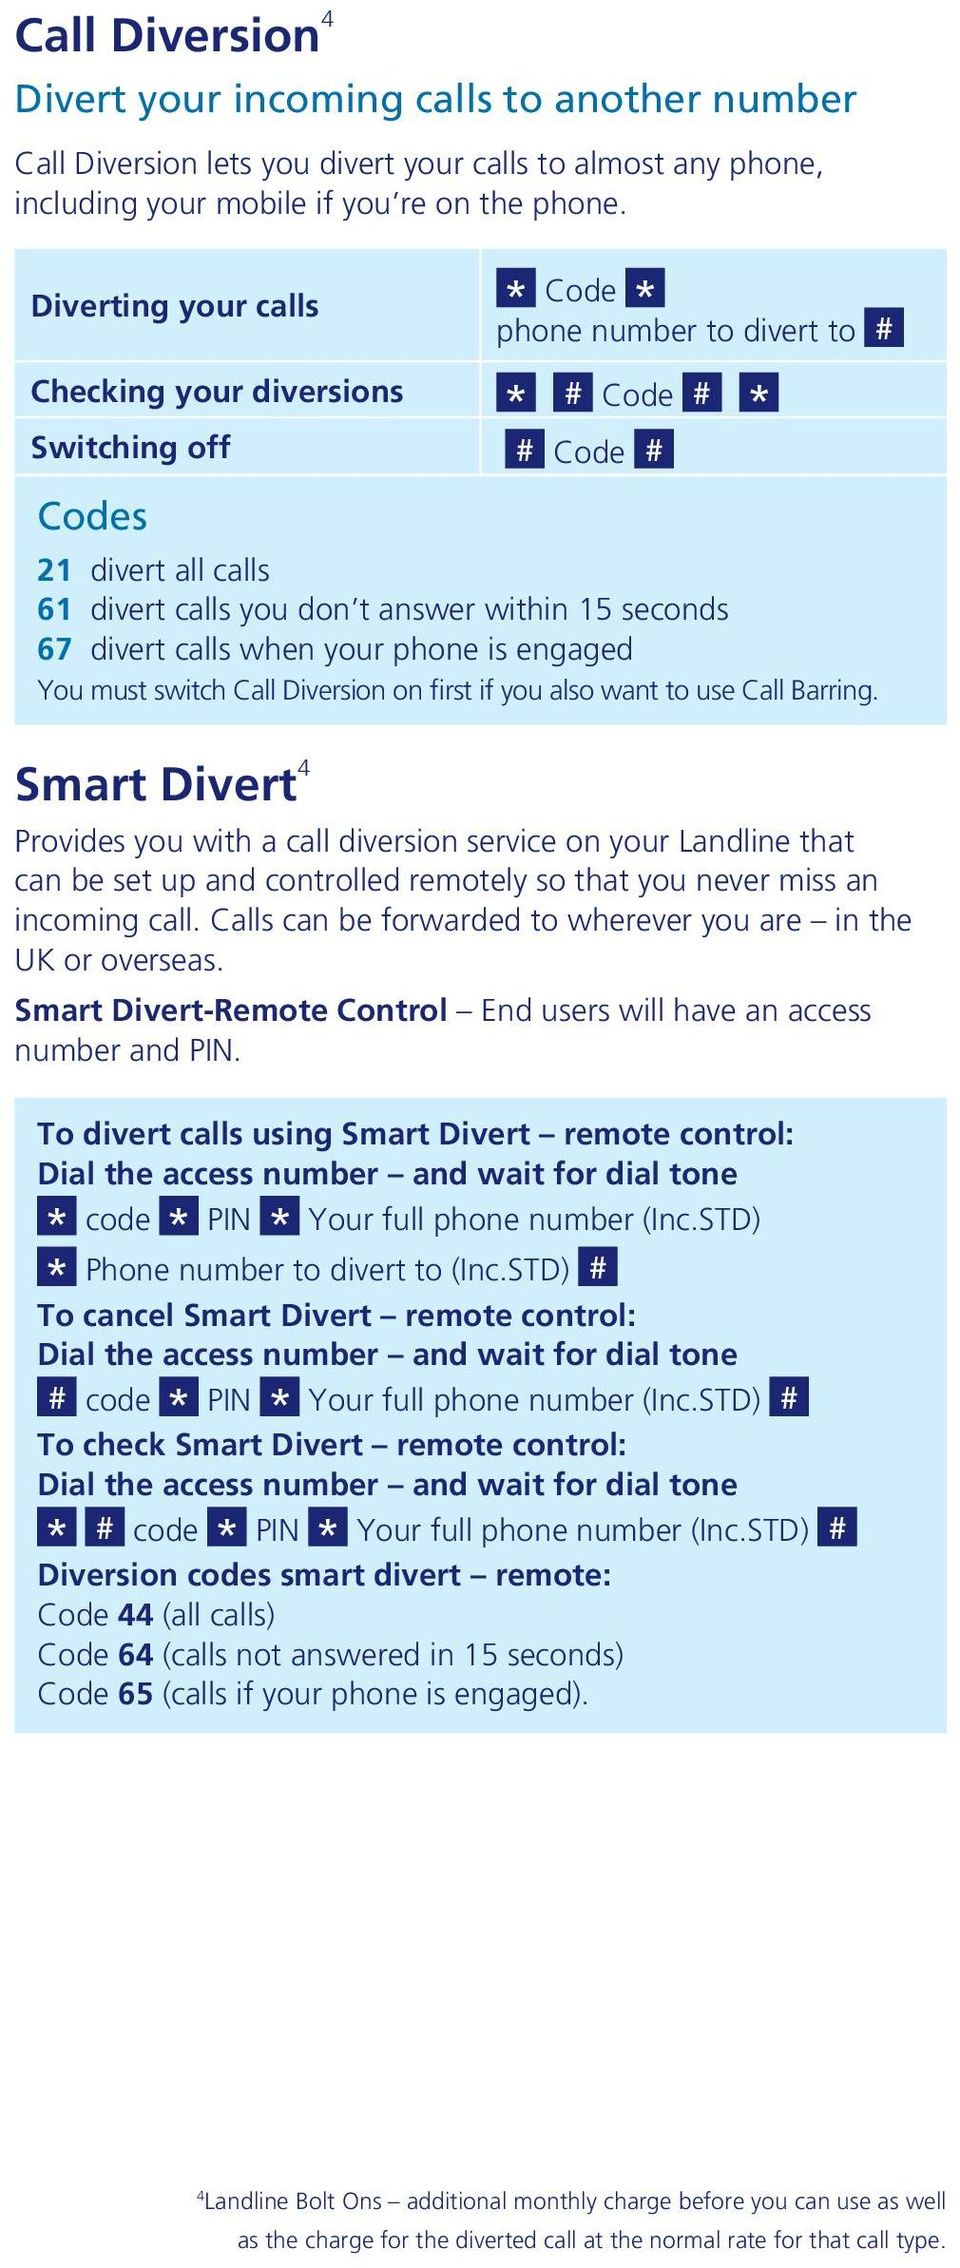 divert calls when your phone is engaged You must switch Call Diversion on first if you also want to use Call Barring.